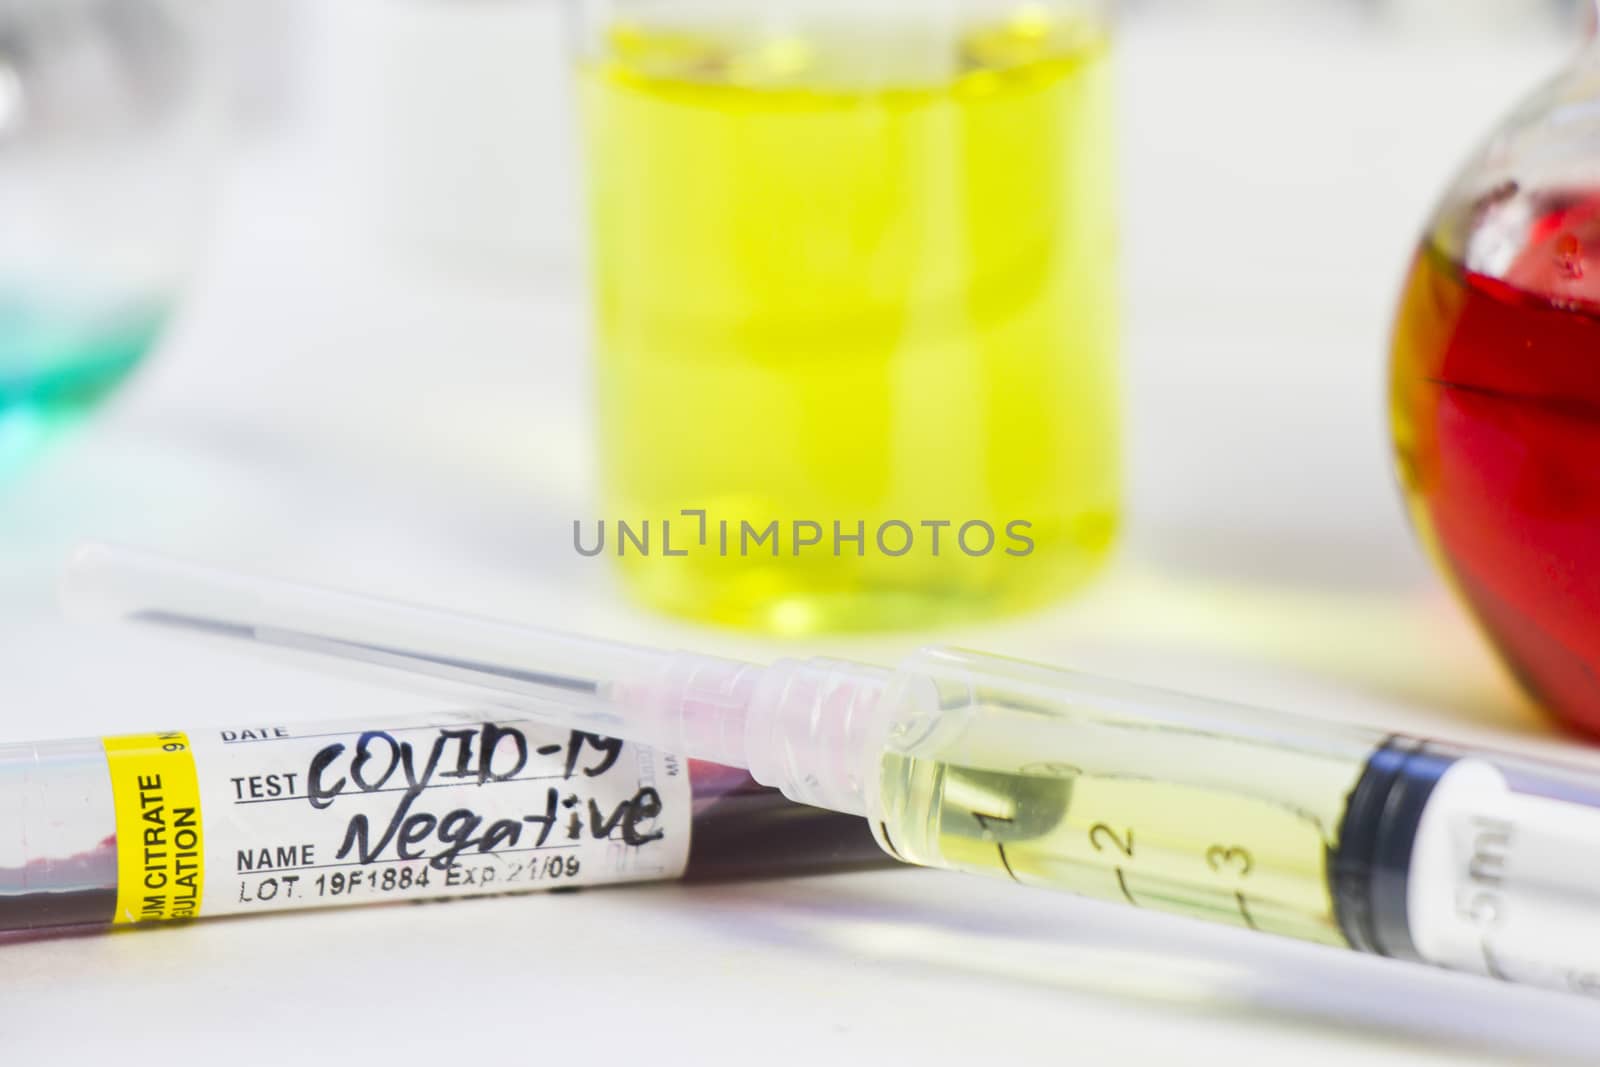 Corona virus and Covid-19 positive blood test tubes on the white background. Diagnosis and laboratory. Medical needle and blood tube, corona virus or covid-19 vaccine. Close-up and studio shoot.